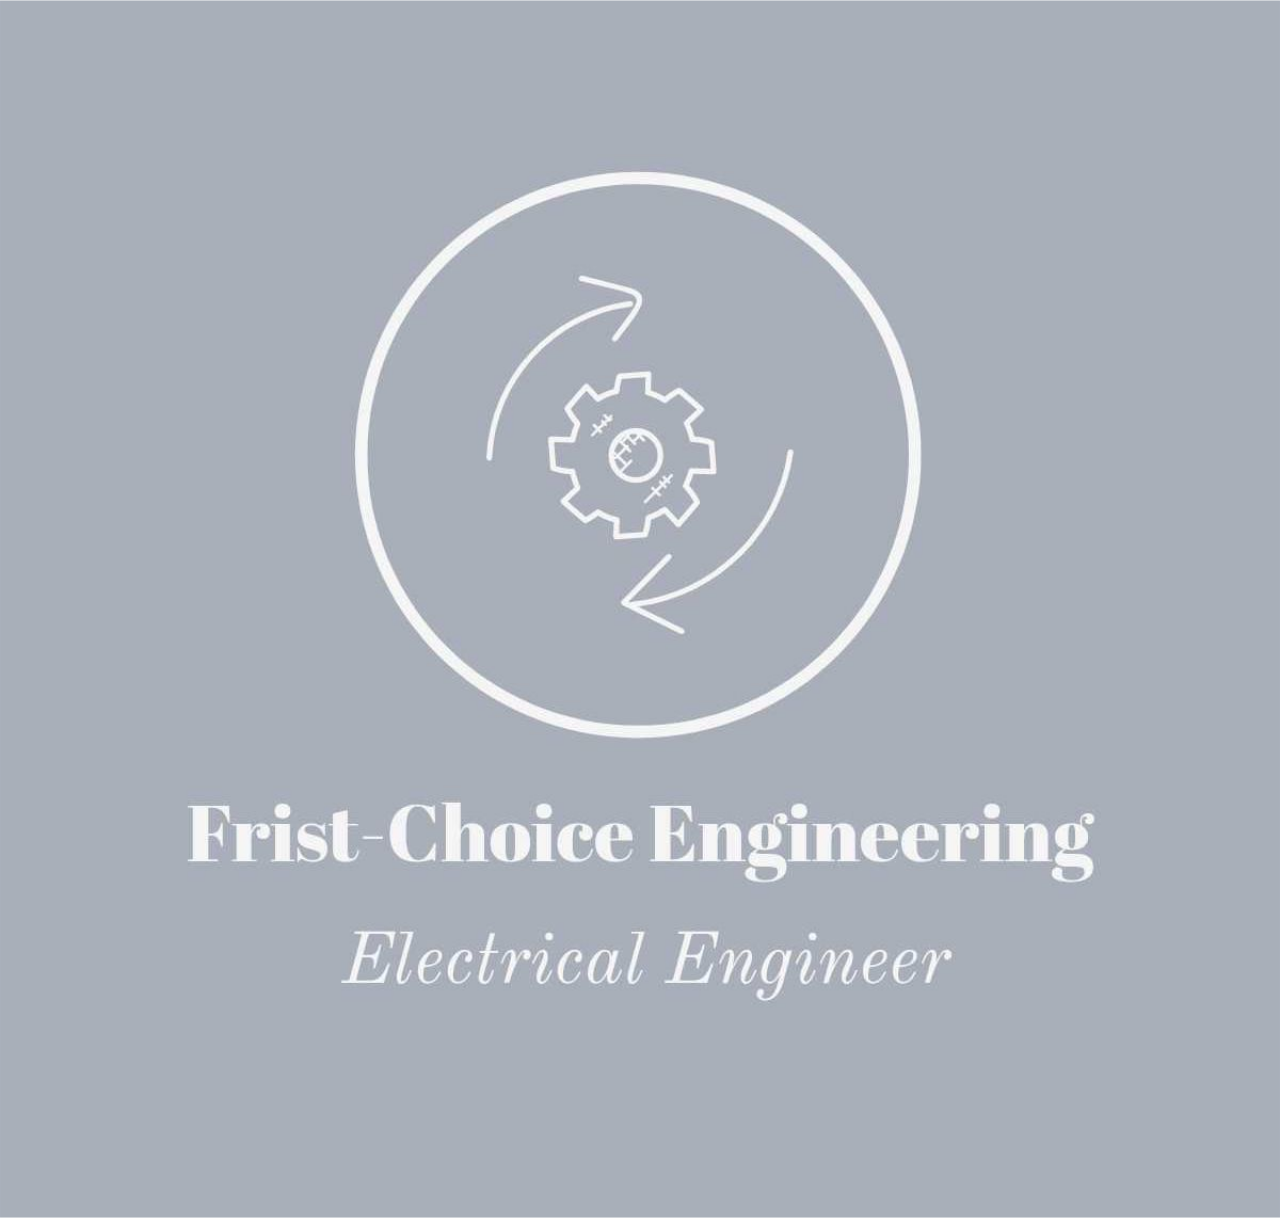 Frist-Choice Engineering's web page